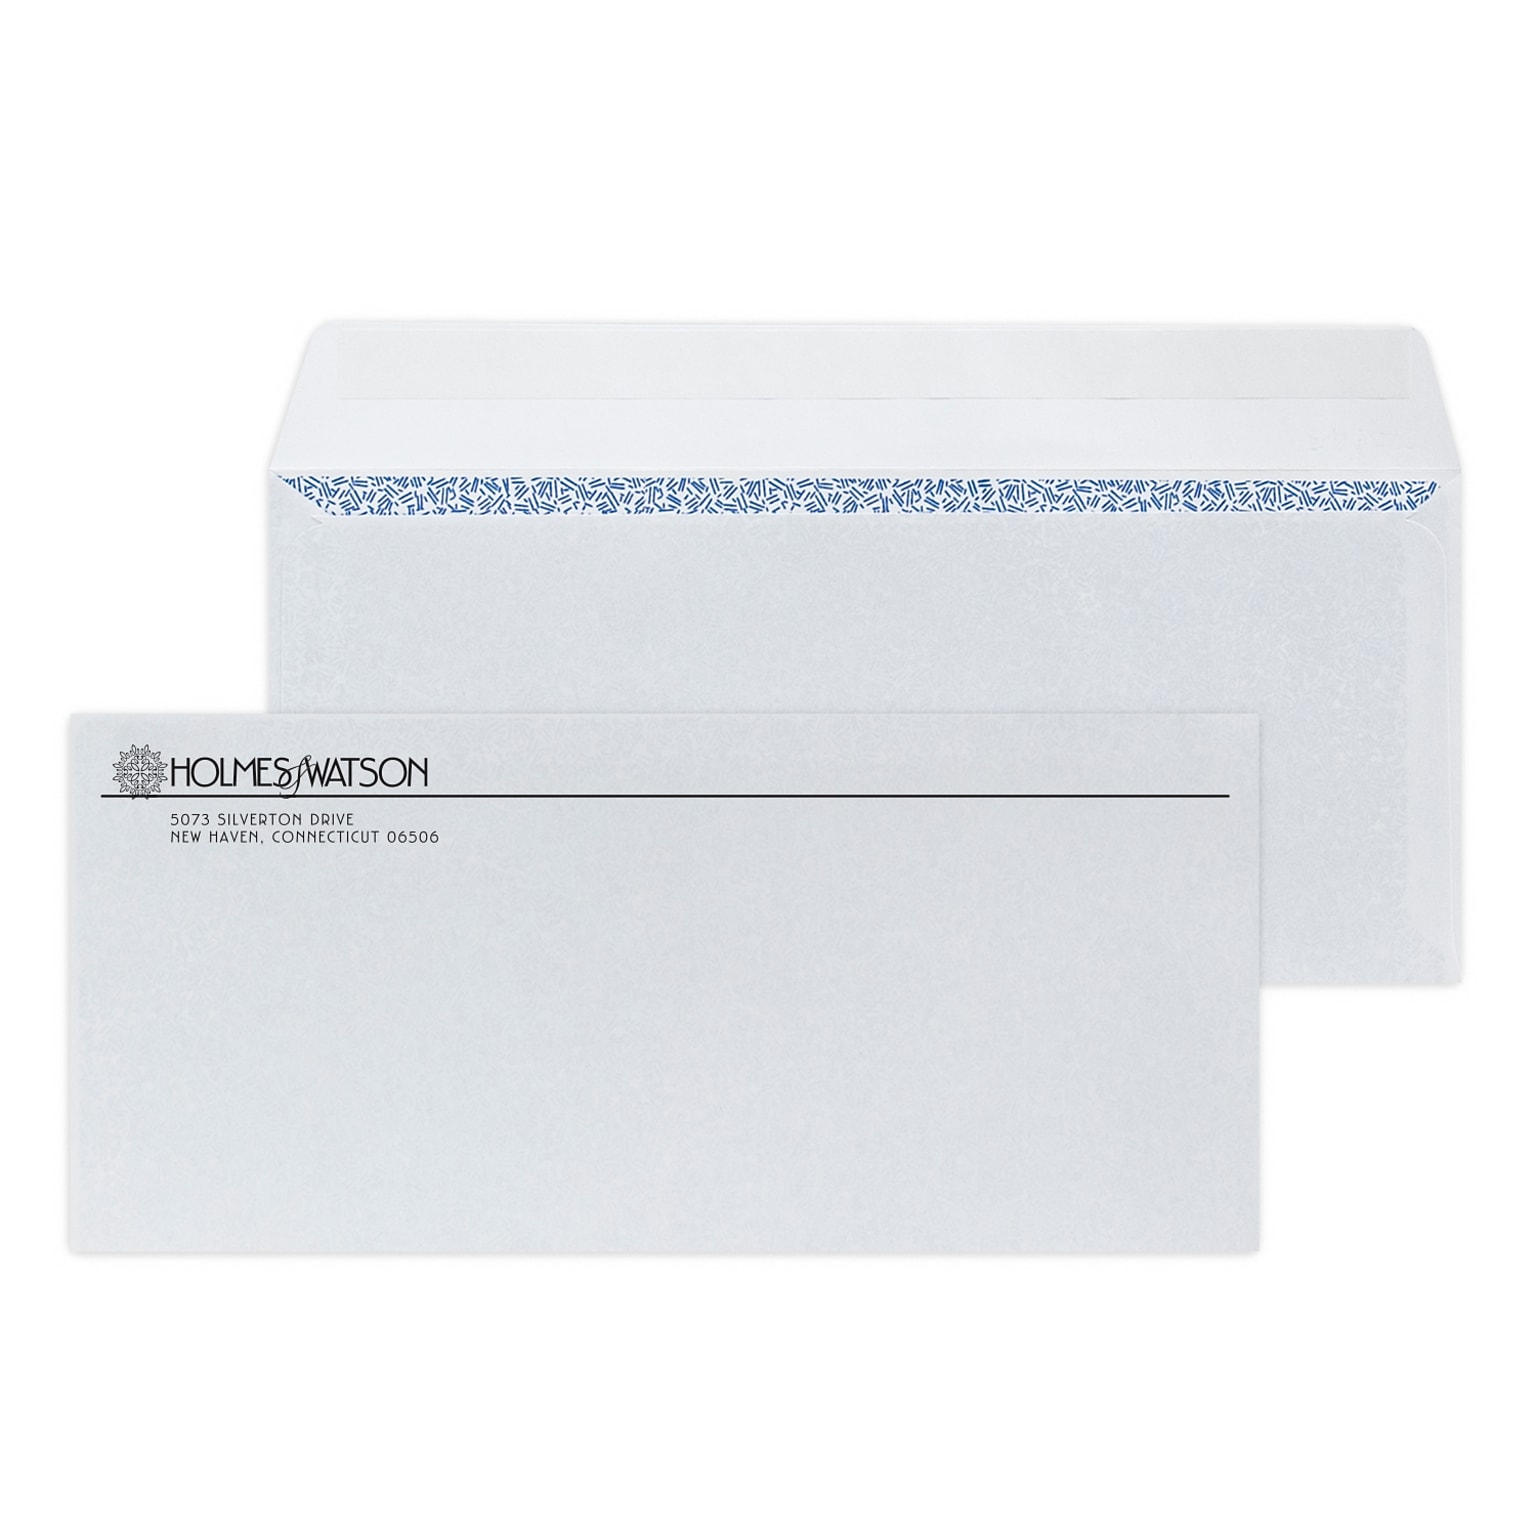 Custom #10 Peel and Seal Envelopes with Security Tint, 4 1/8 x 9 1/2, 24# White Wove, 1 Standard Ink, 250 / Pack